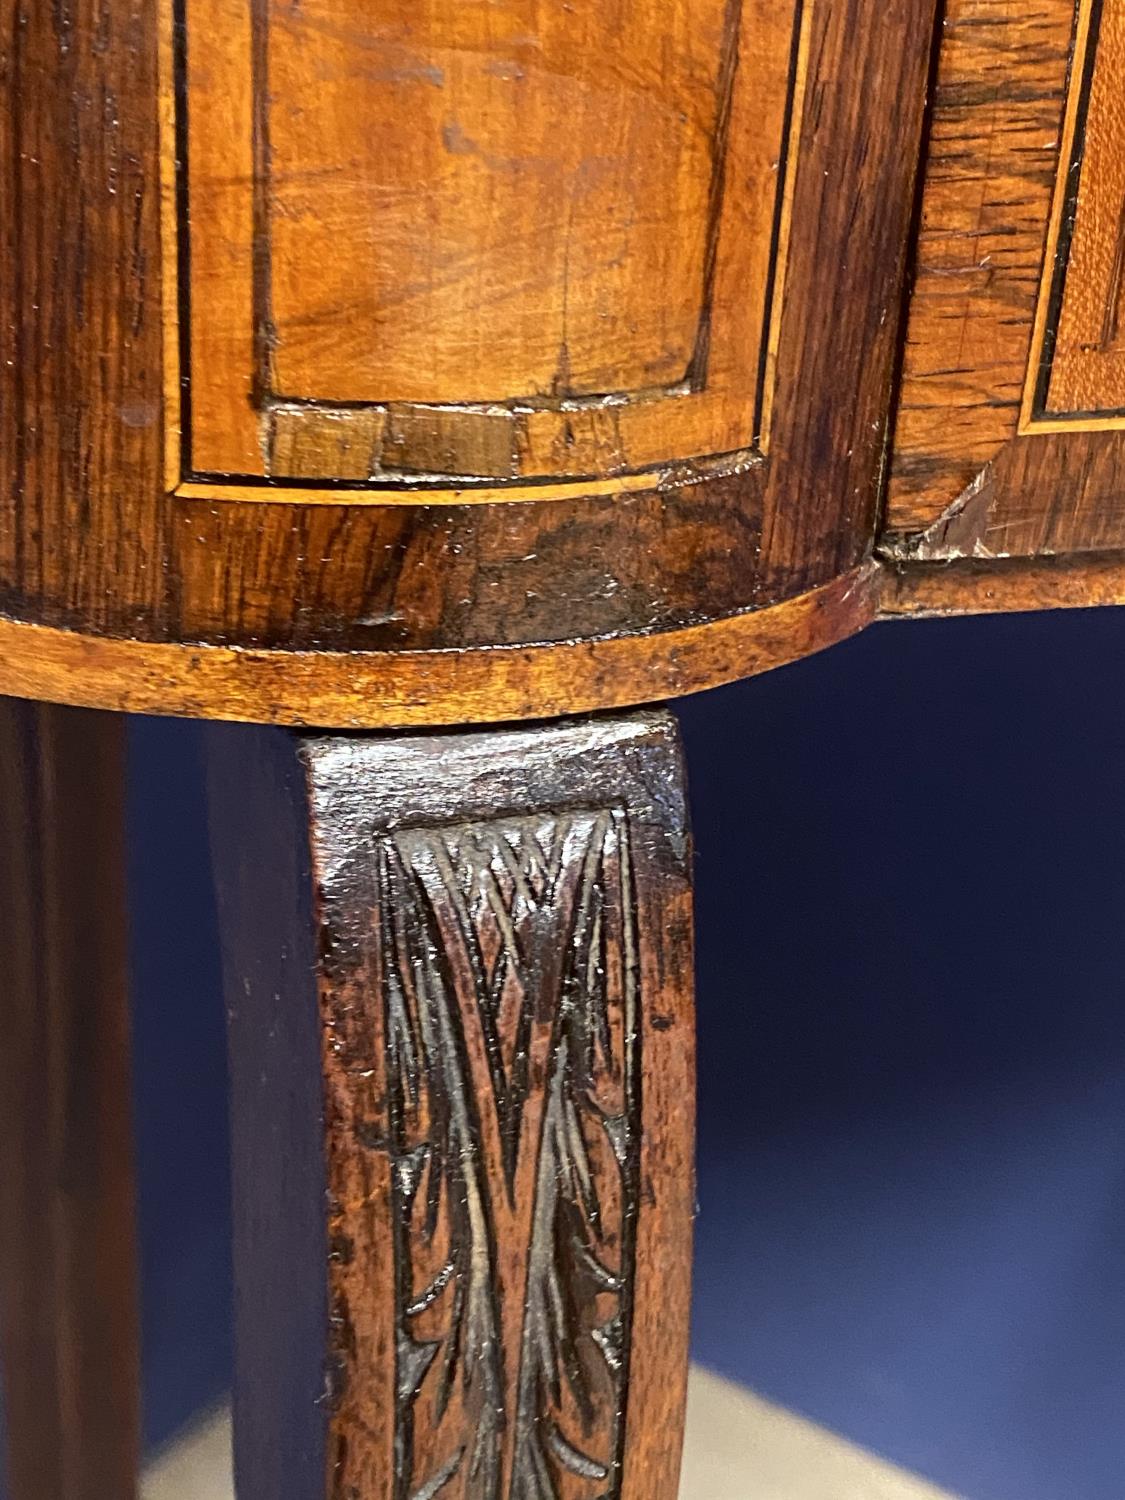 C19th inlaid marquetry two tier kidney shape side table with drawer and under shelf - Image 8 of 8